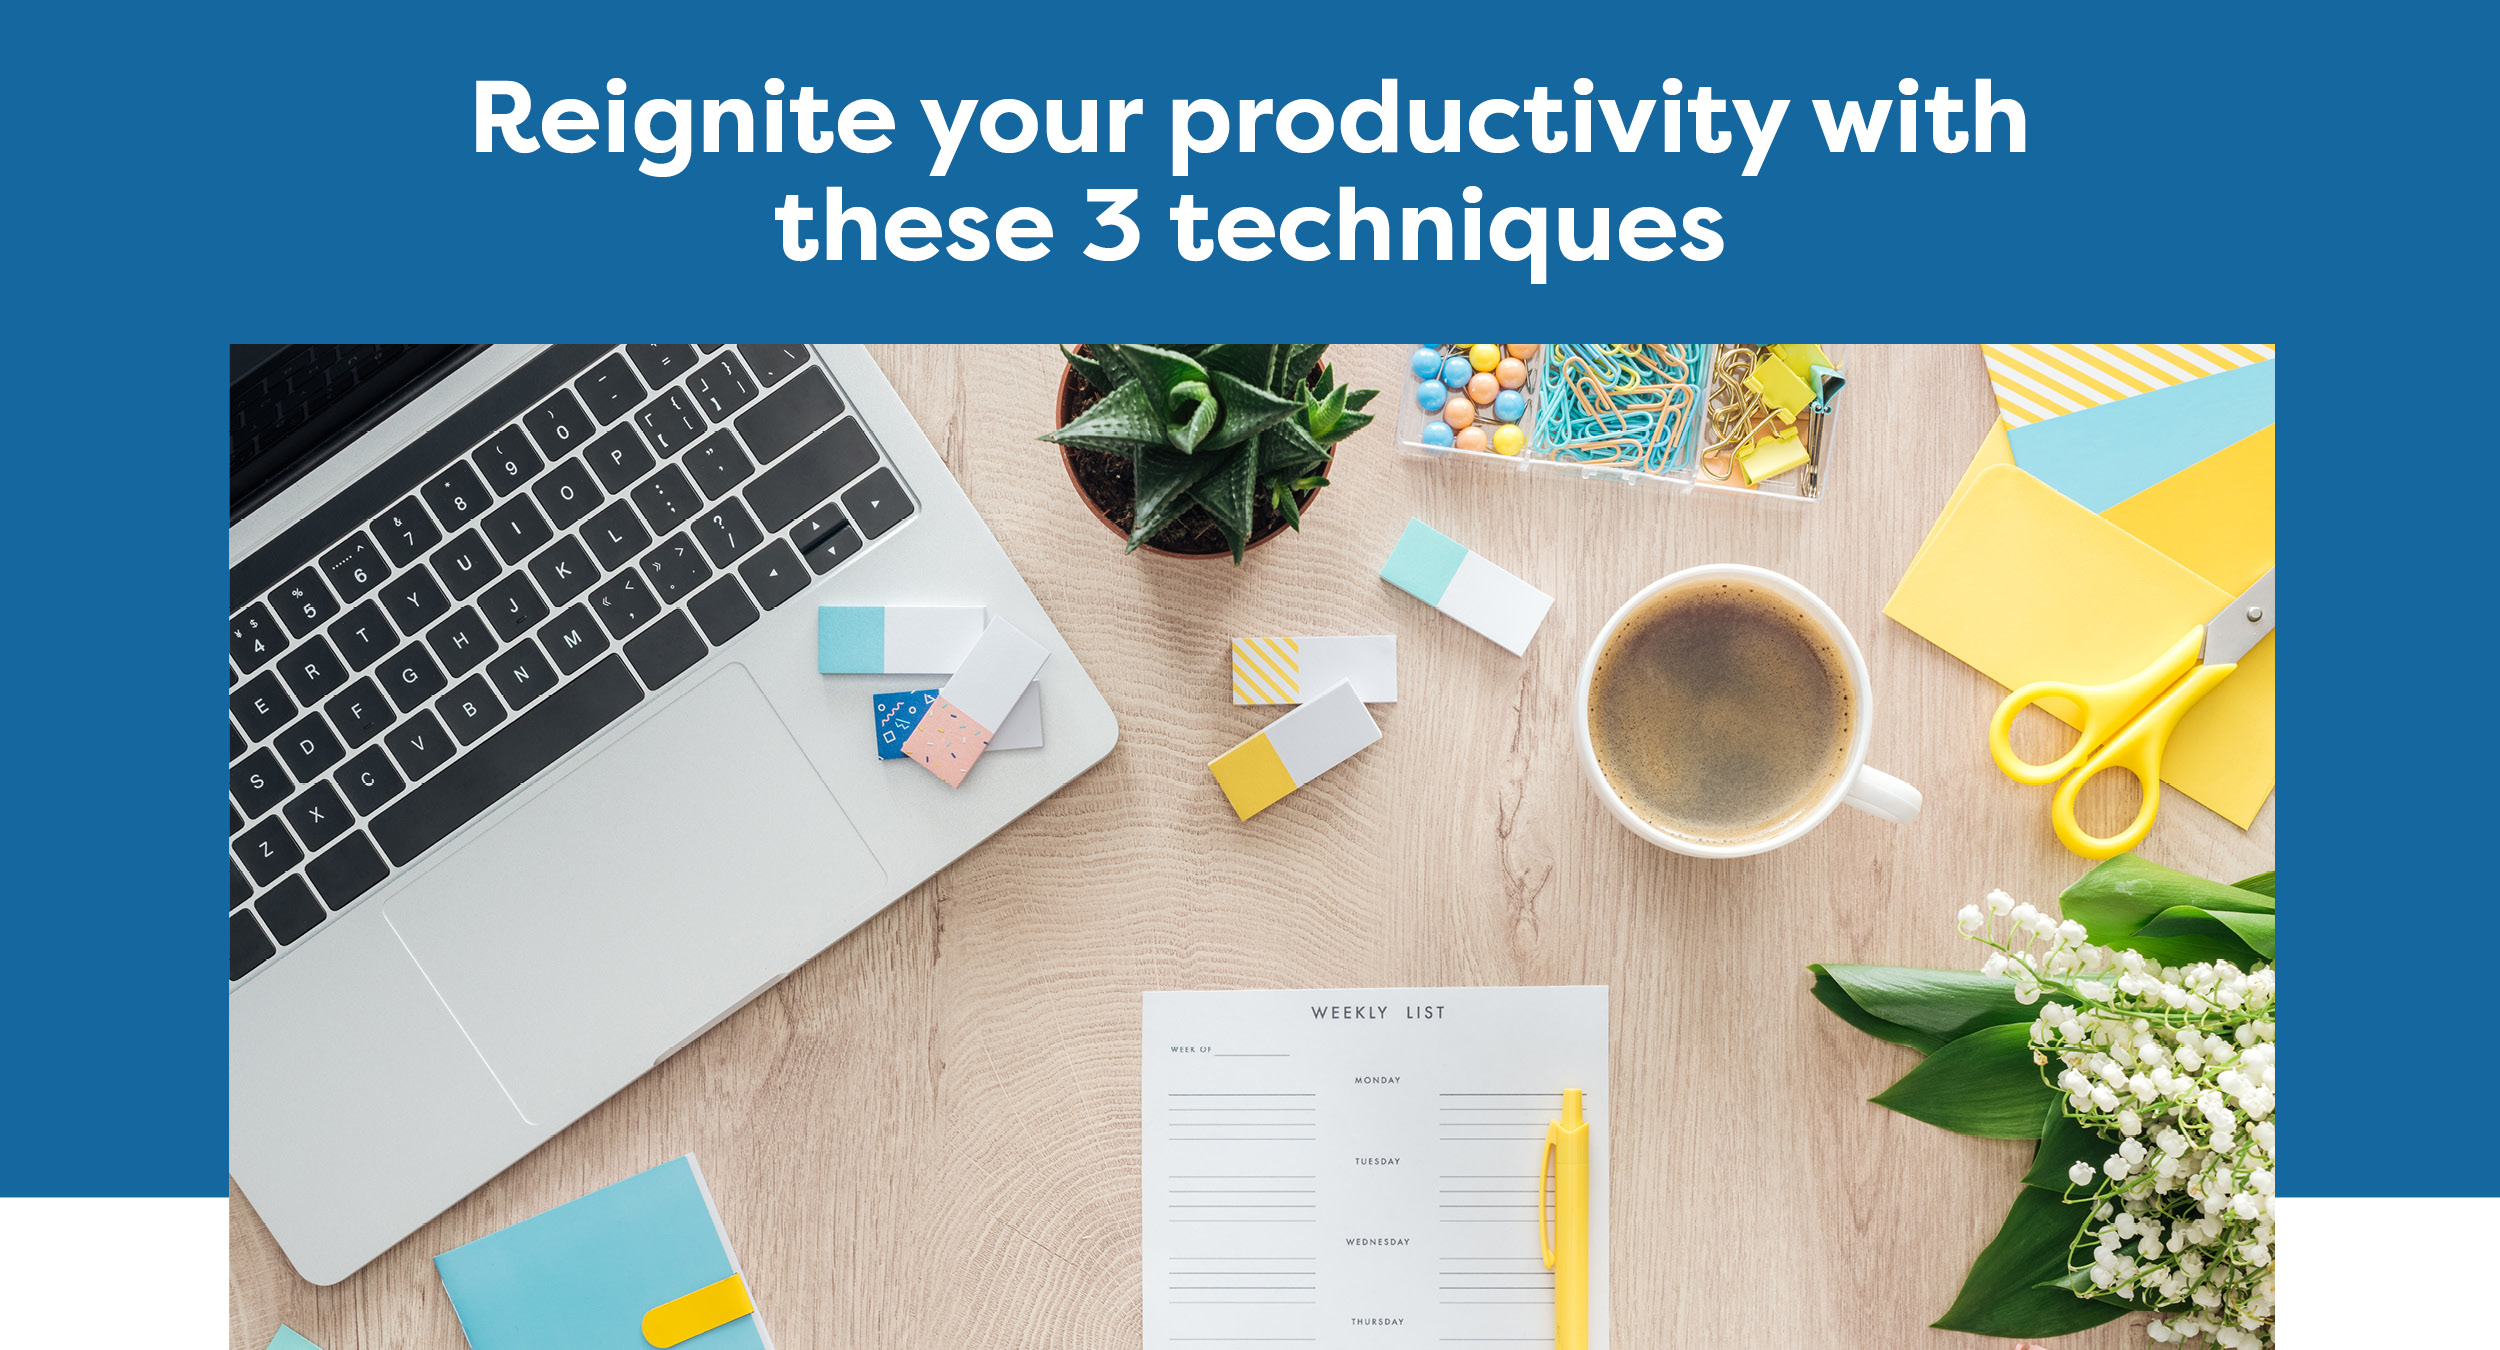 Reignite your productivity with these 3 techniques